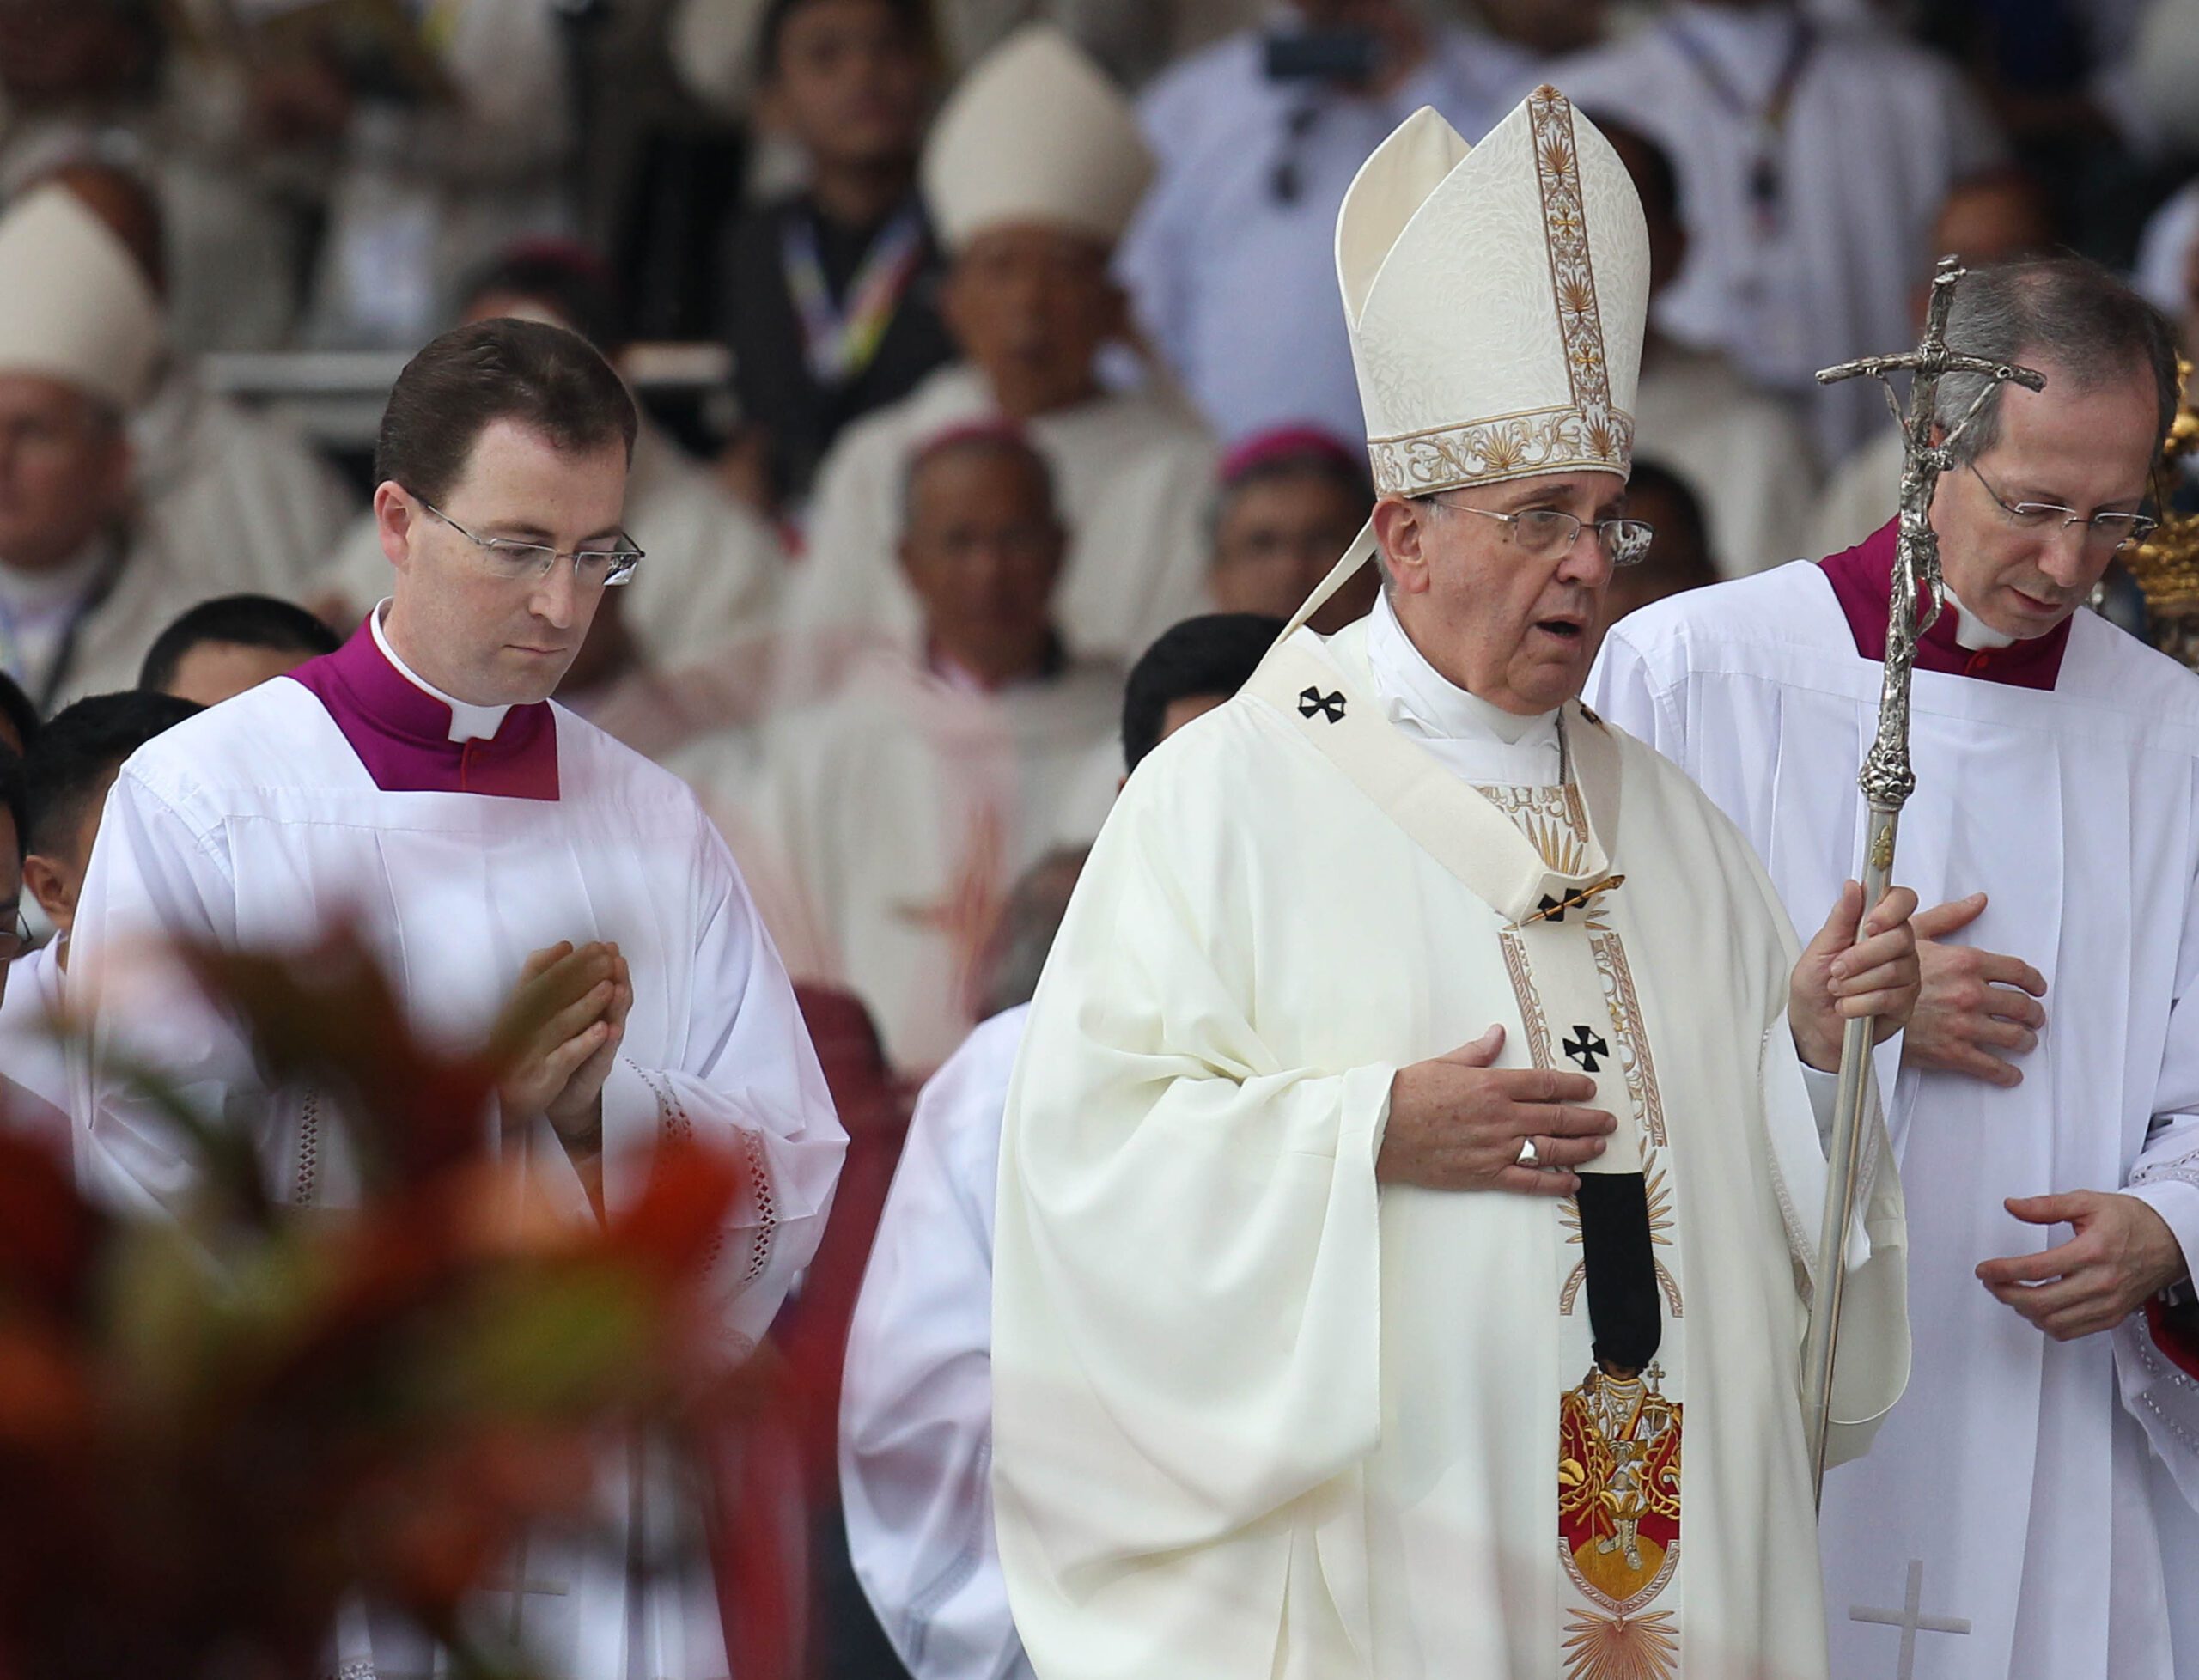 Stormy synod ends in stalemate: over to you, Pope Francis